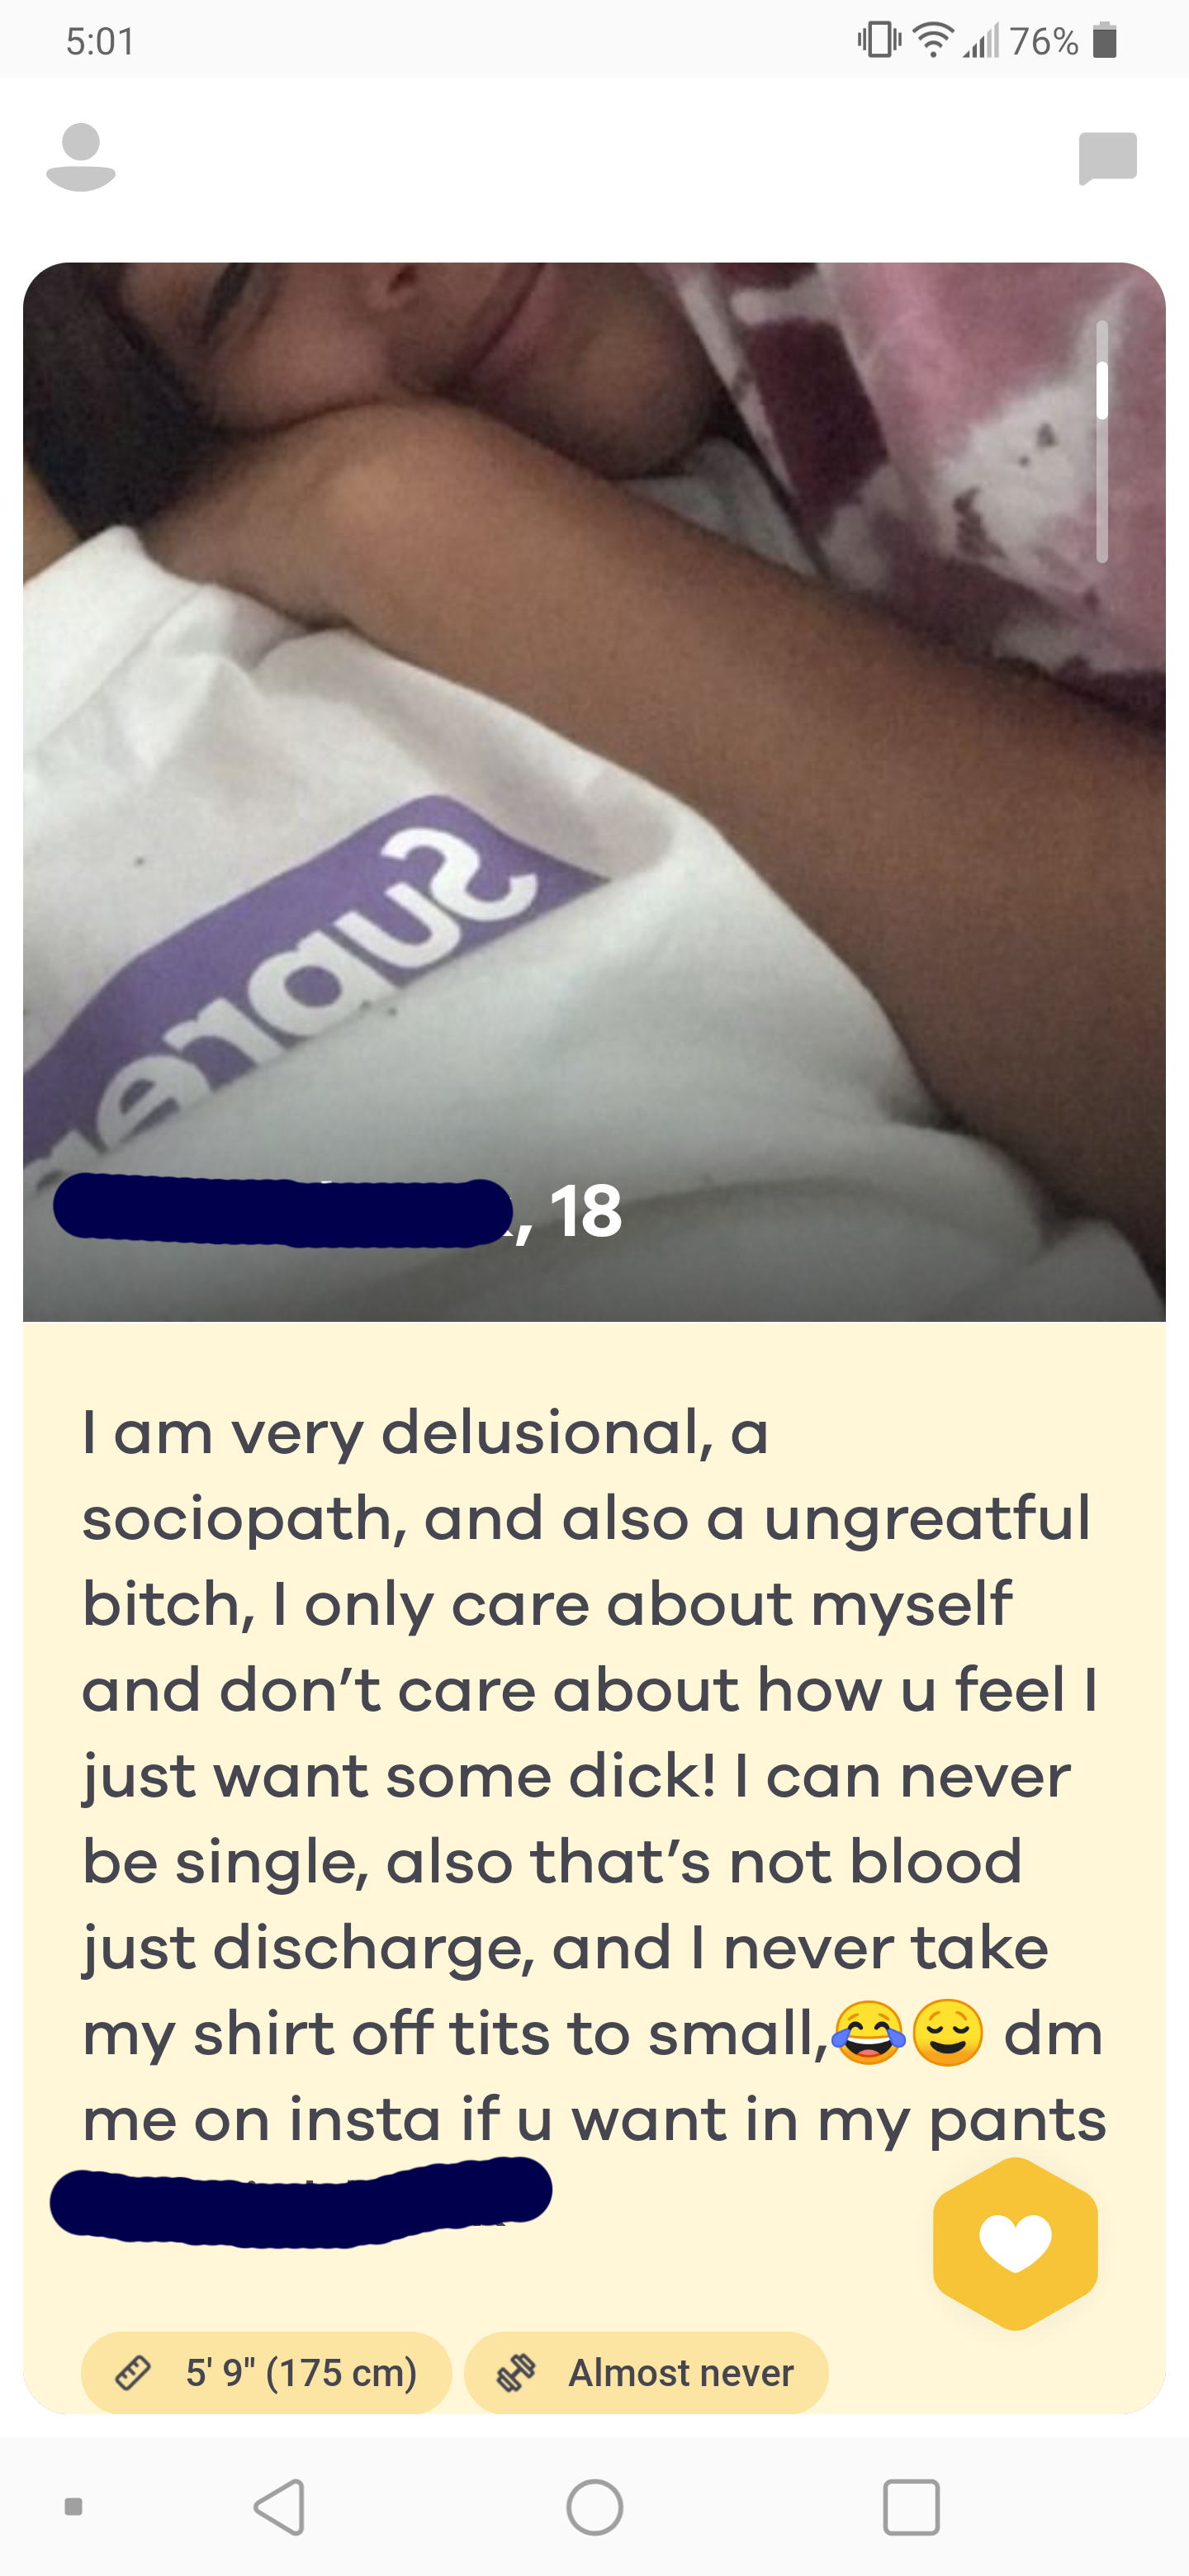 tinder wins and fails -arque 18 I am very delusional, a sociopath, and also a ungrateful bitch, I only care about myself and don't care about how u feel I just want some dick! I can never be single, also that's not blood just discharge, and I never take m